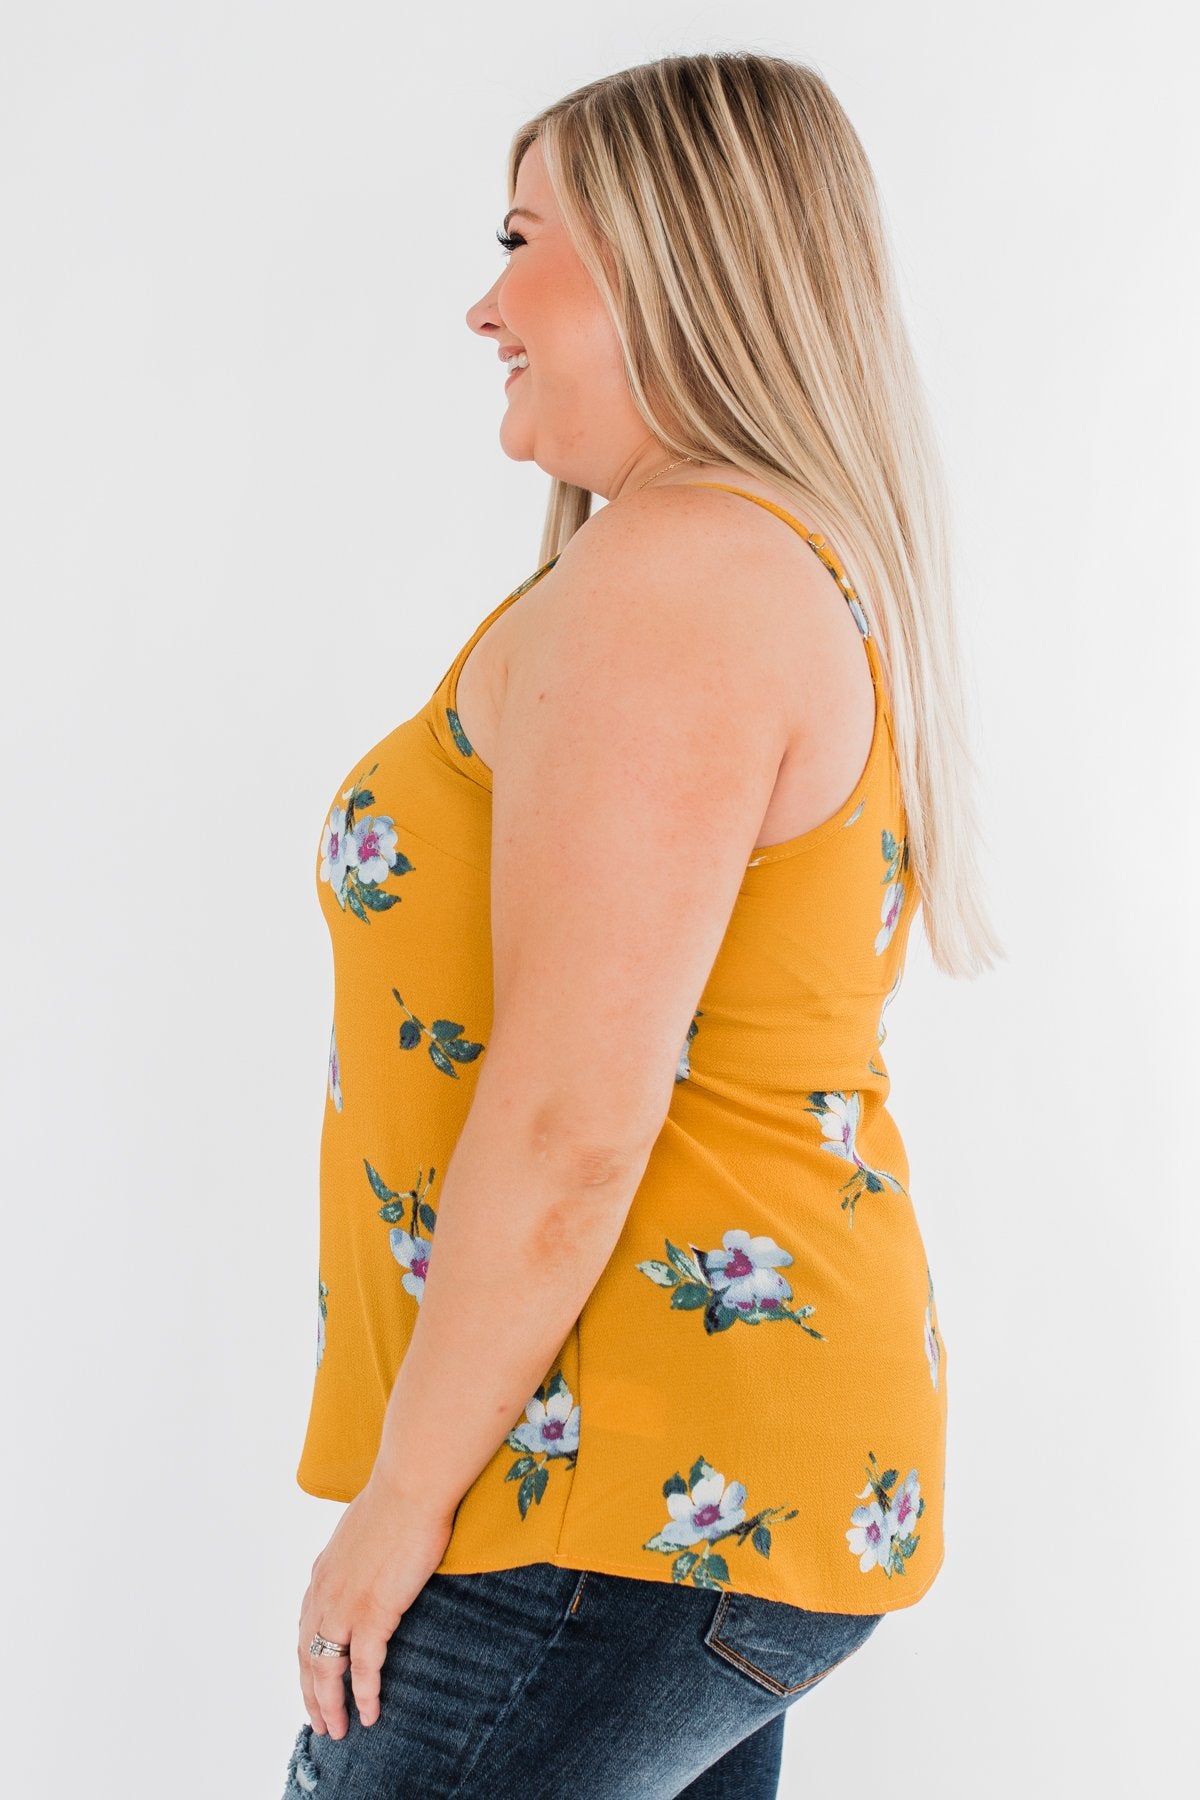 Sure as the Sun Floral Tank Top- Mustard